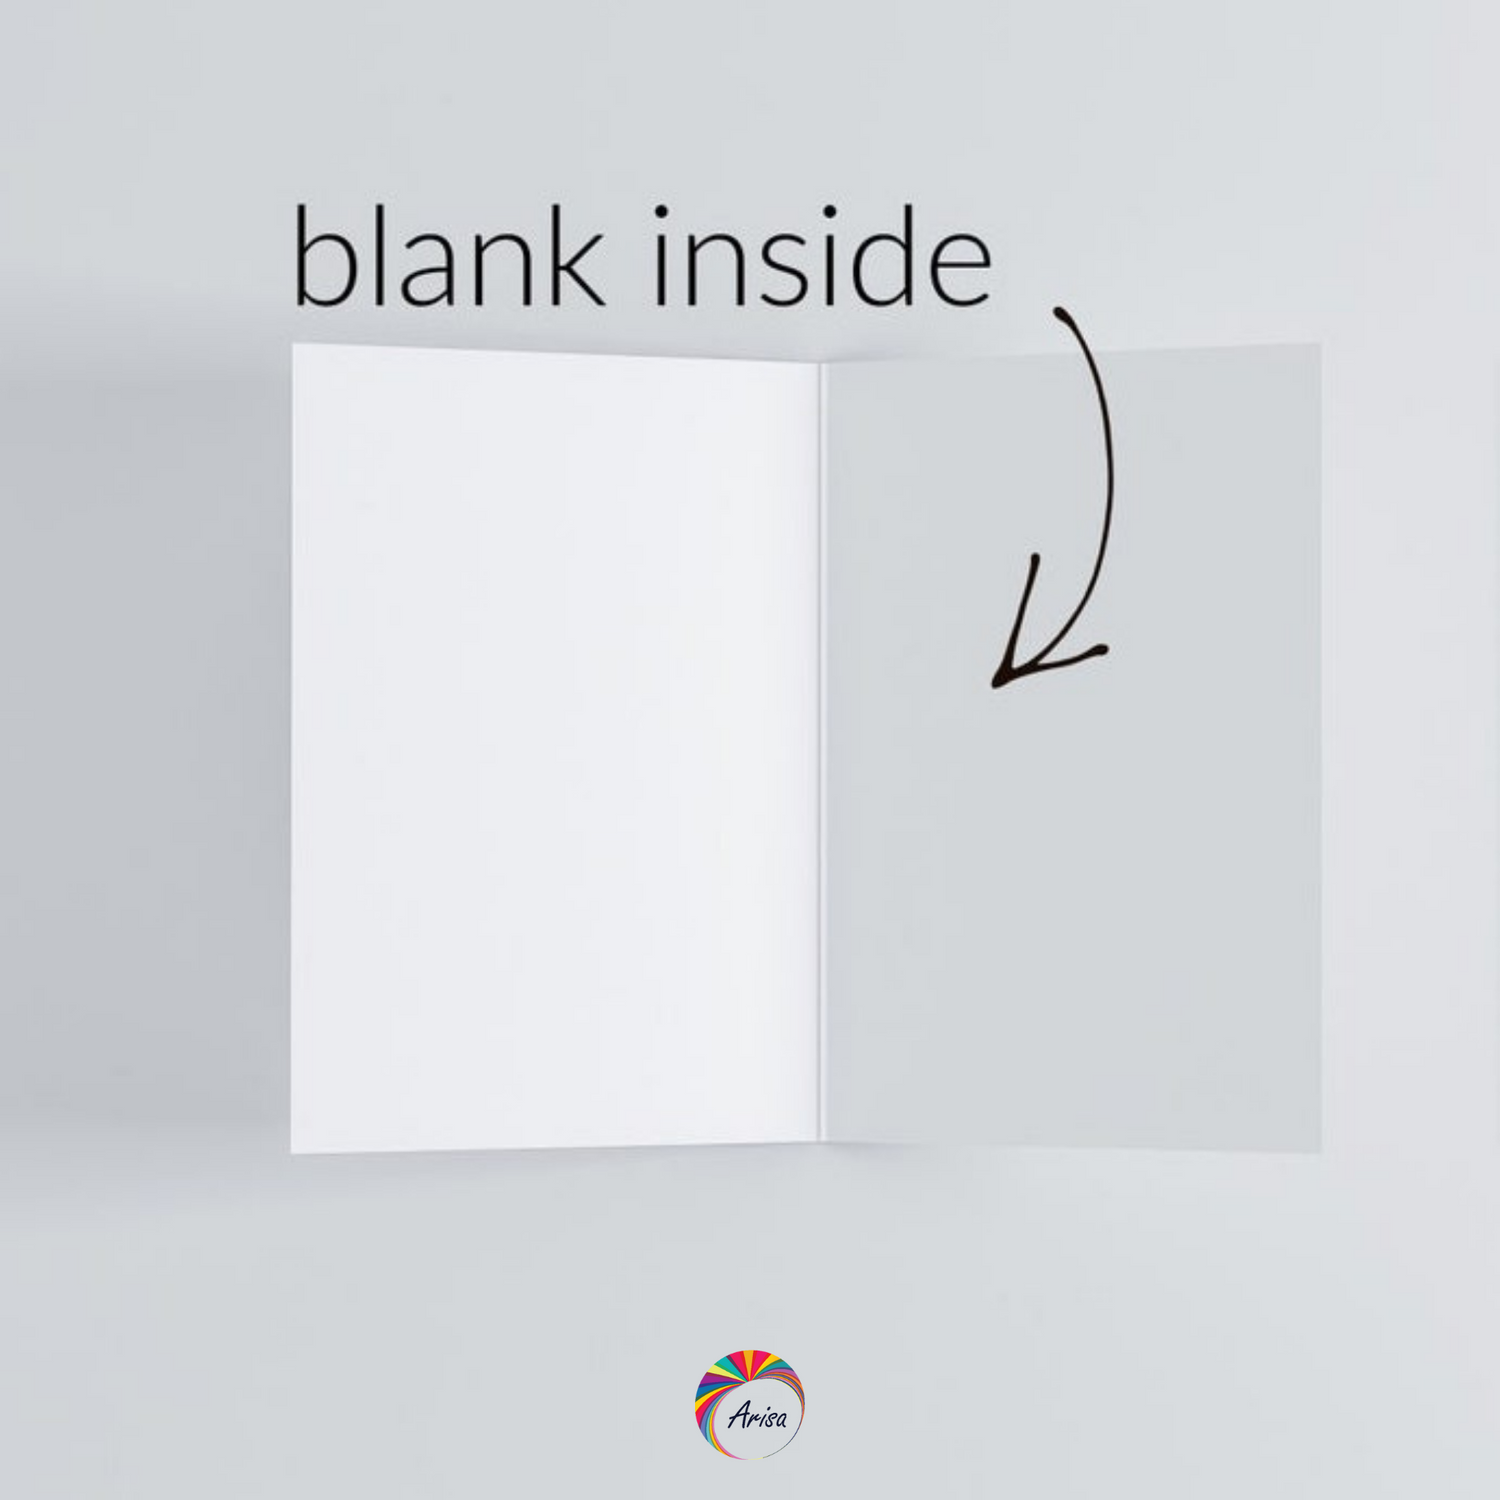 The blank inside of "IRIS" Greeting Card by ArisaTeam.